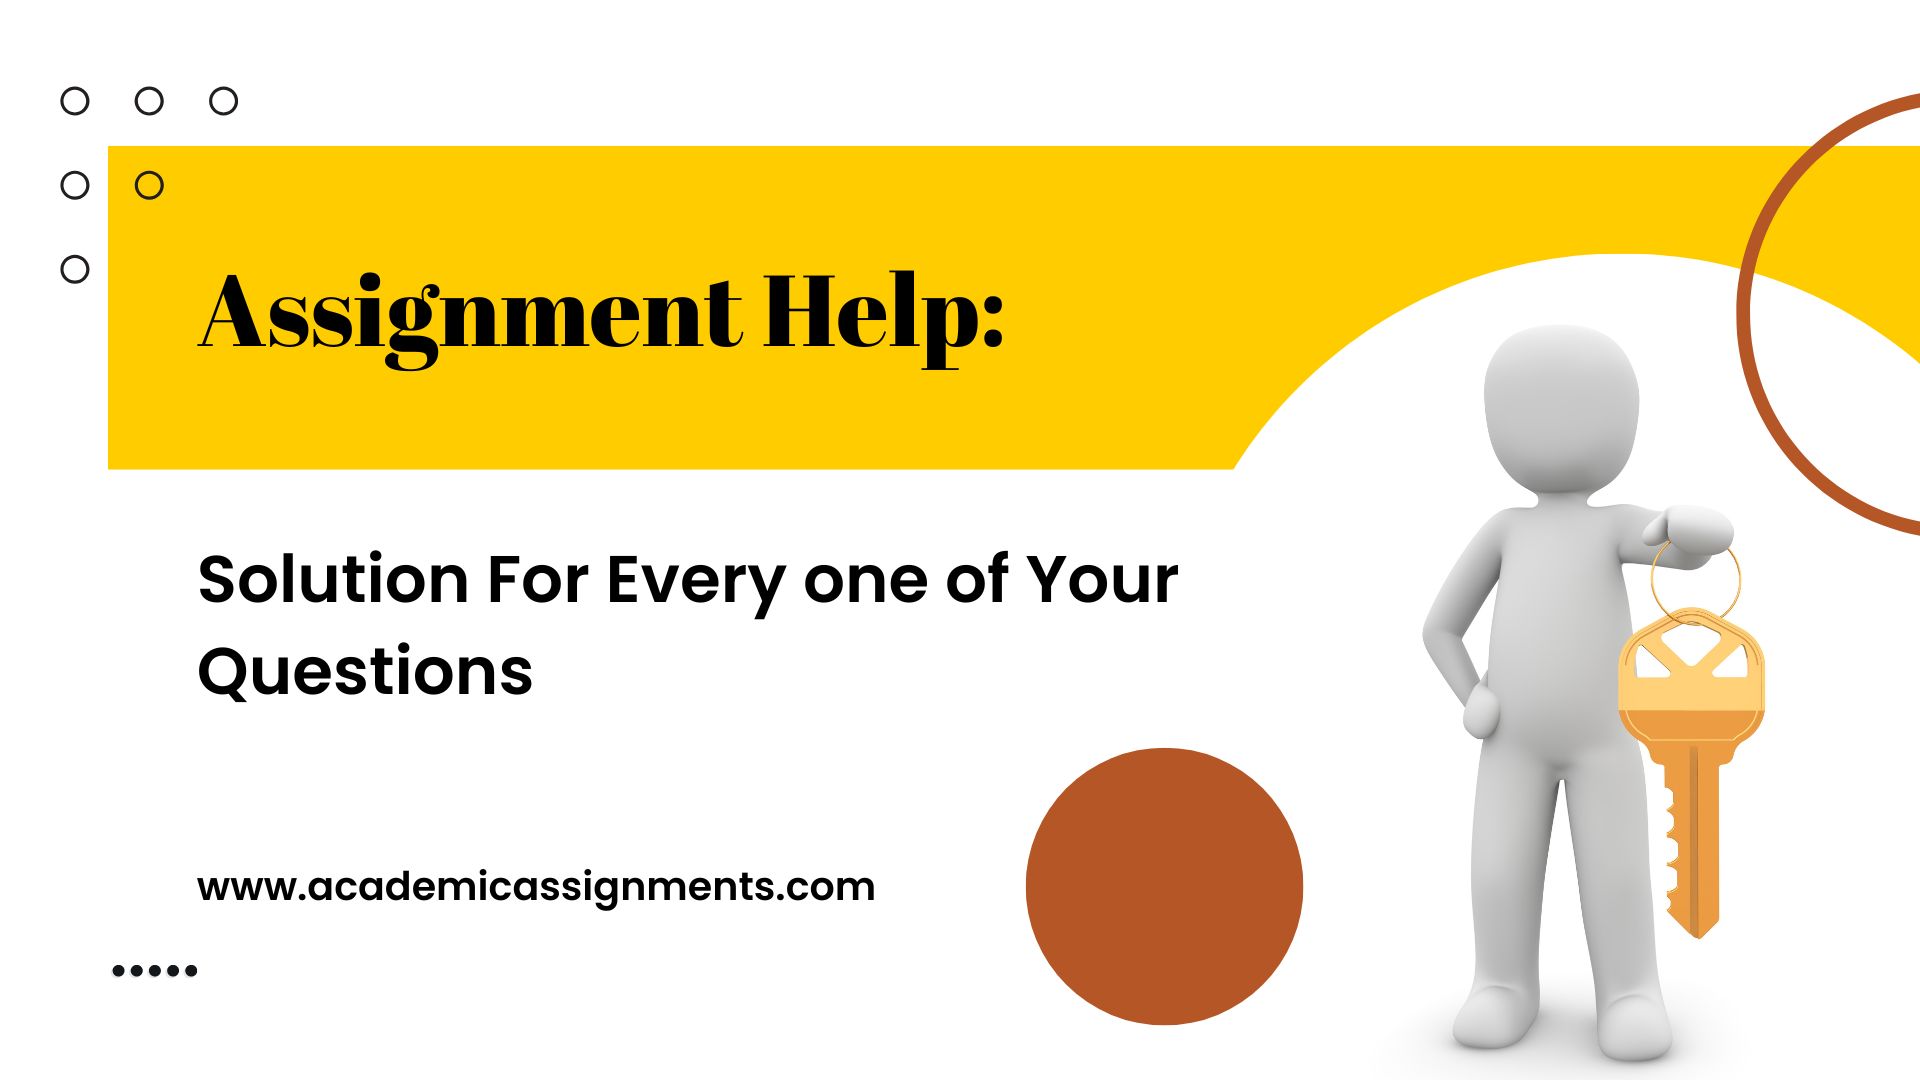 Assignment Help Solution For Every one of Your Questions